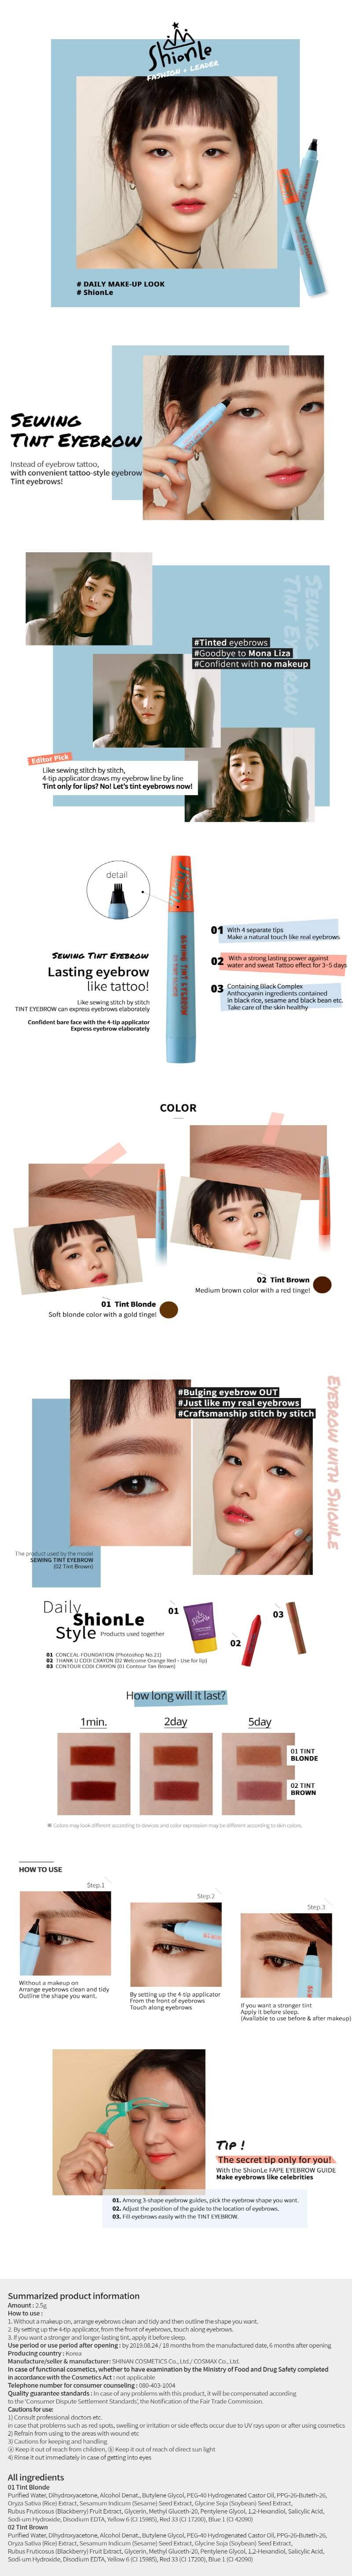 ShionLe , Sewing Tint Eyebrow , ShionLe Sewing Tint Eyebrow ,Tint Eyebrow , ดินสอเขียนคิ้ว , ดินสอเขียนคิ้ว ShionLe